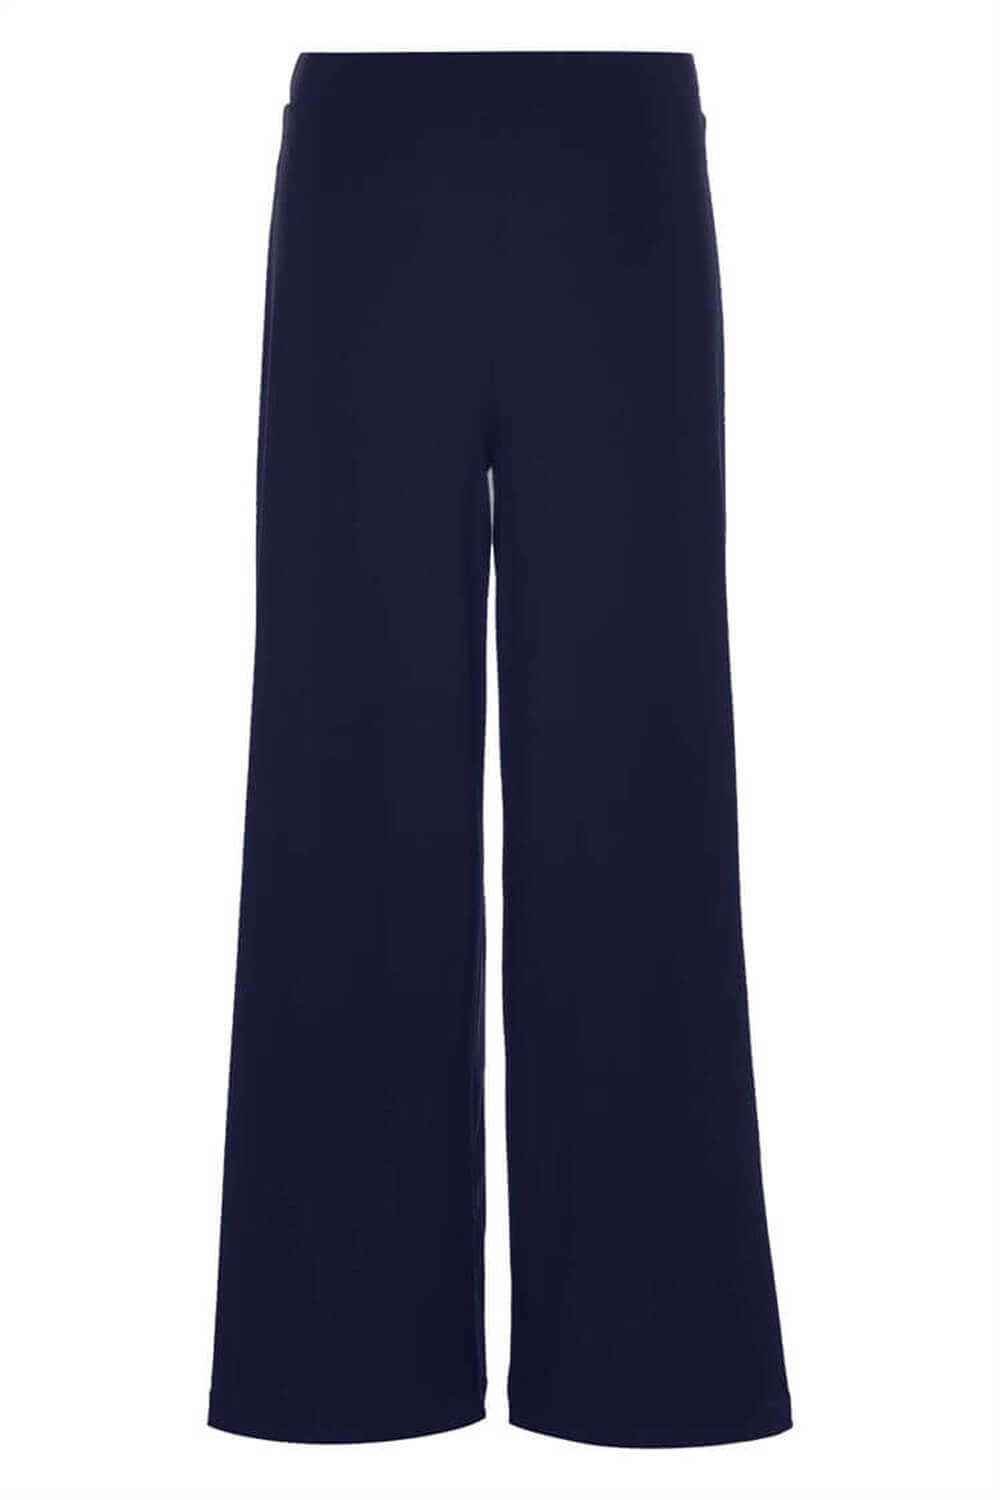 Navy  Wide Leg Stretch Trousers, Image 6 of 6